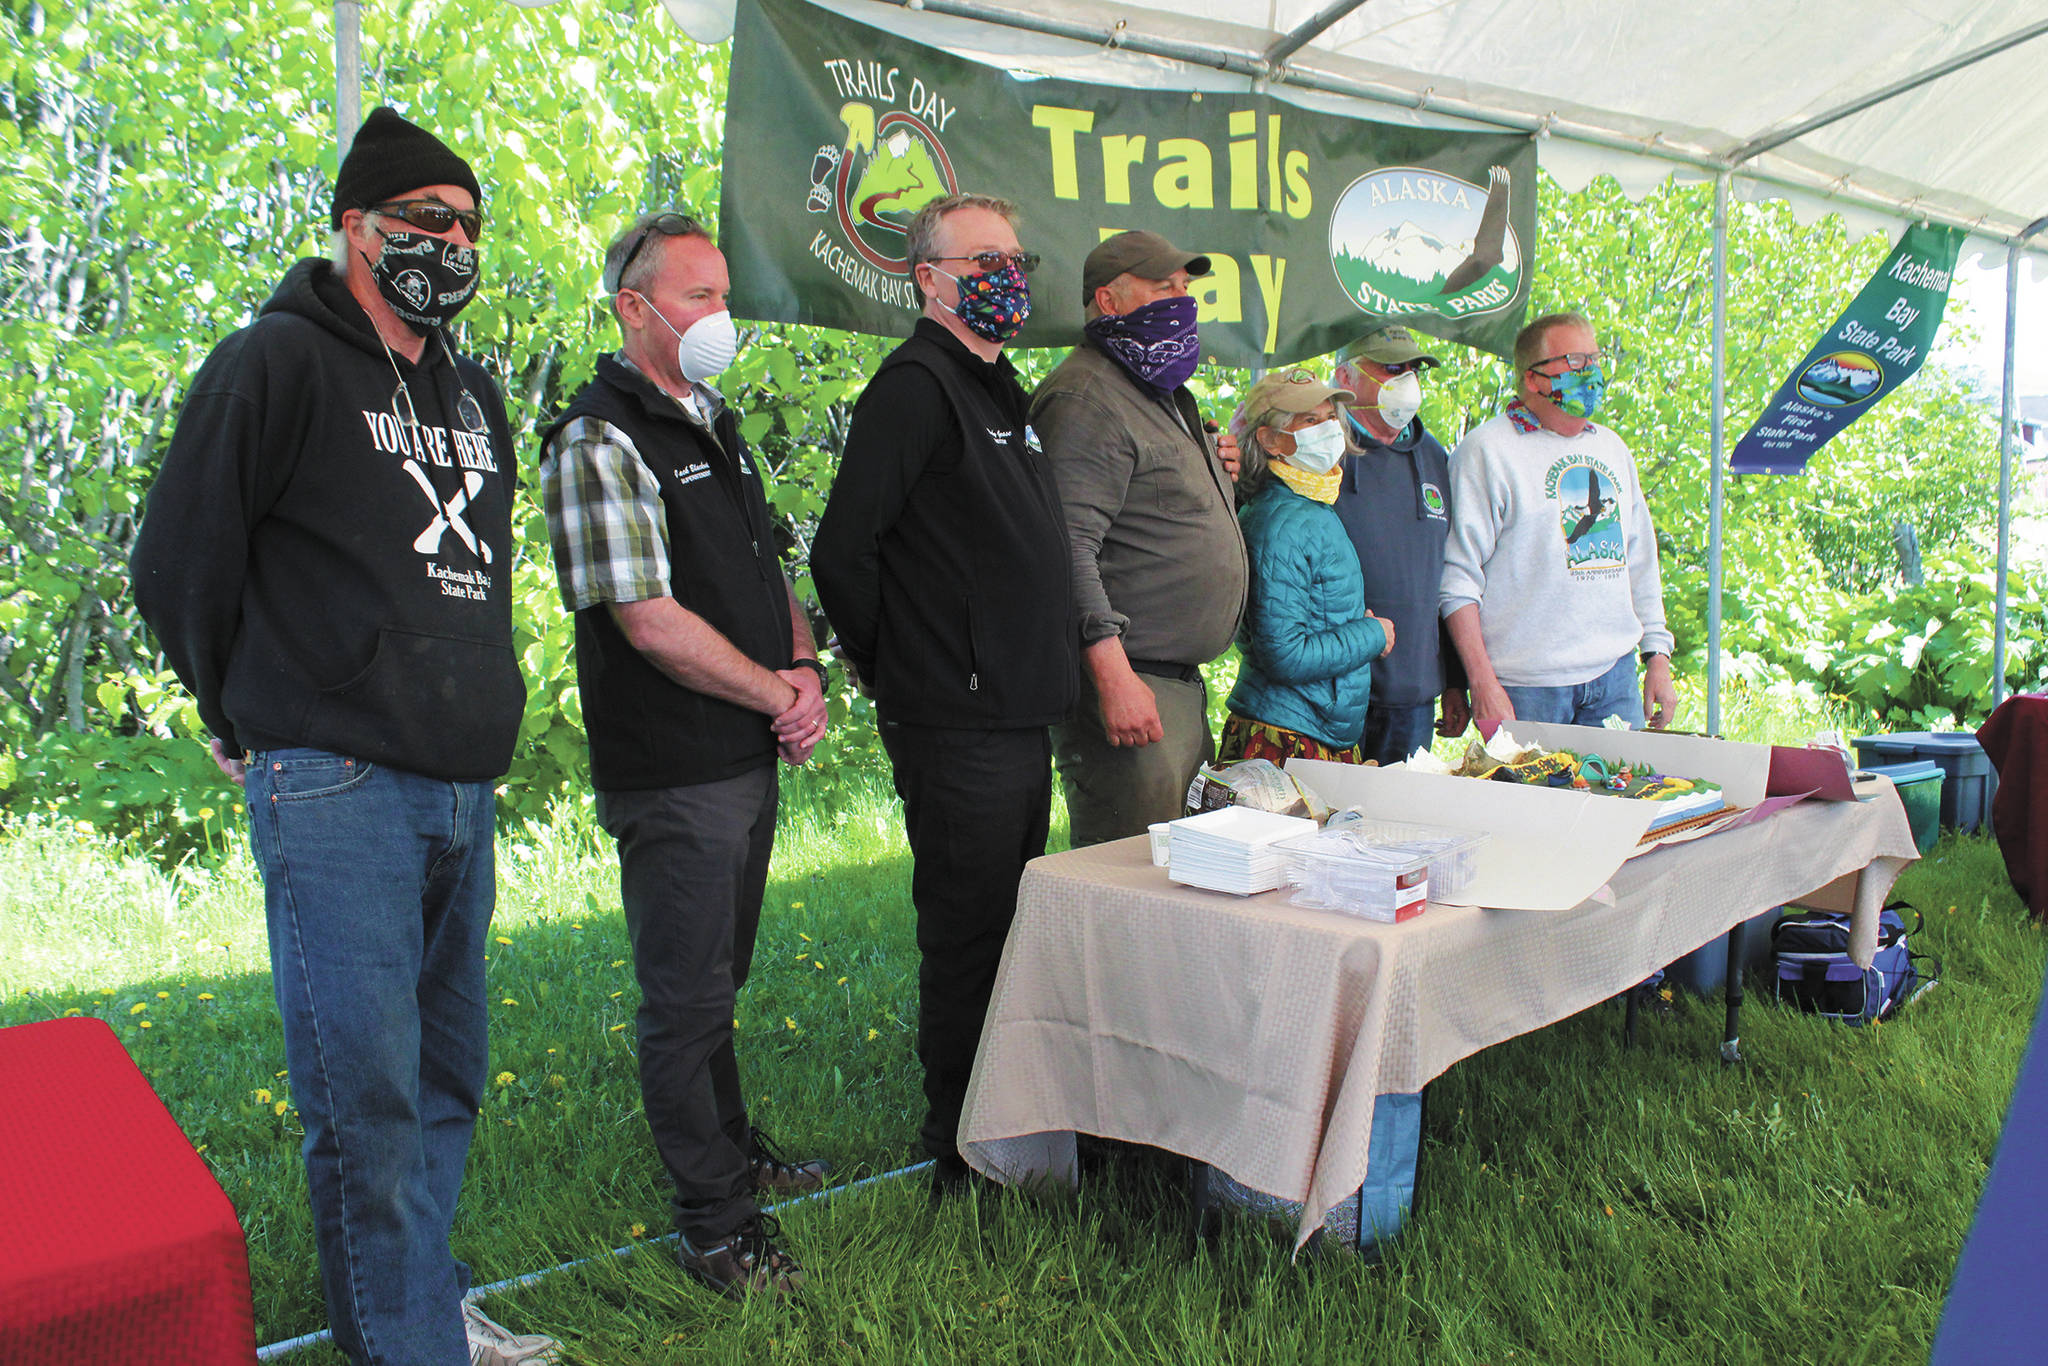 A group of supporters, volunteers, and Alaska Department of Natural Resources staff celebrate the 50th anniversary of Kachemak Bay State Park during a small gathering Saturday, June 6, 2020 at the Homer Chamber of Commerce & Visitor Center in Homer, Alaska. (Photo by Megan Pacer/Homer News)